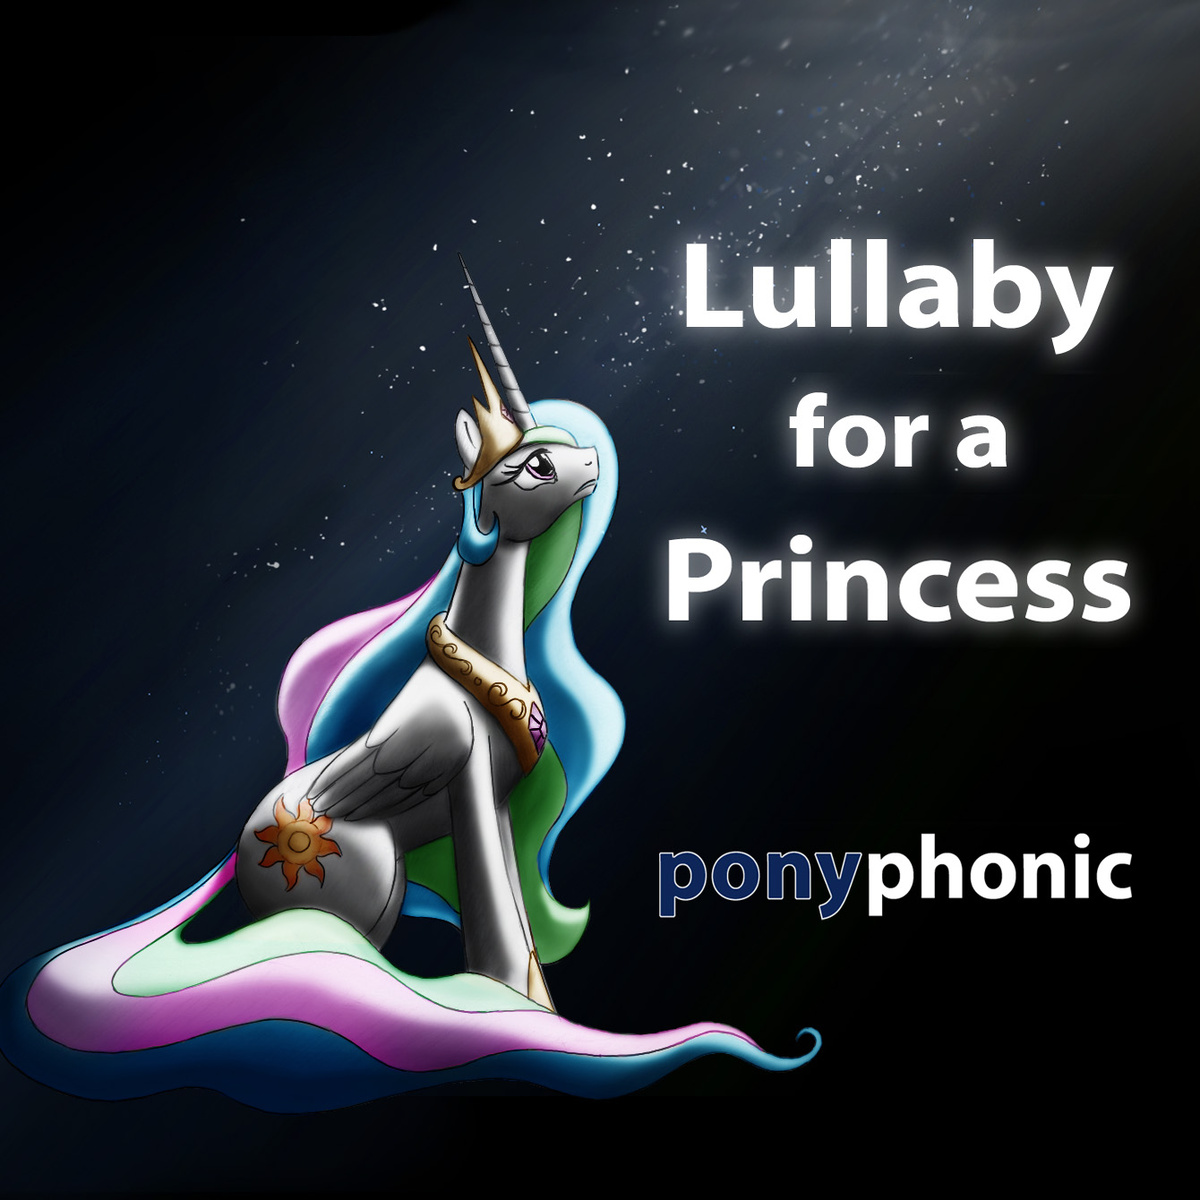 Lullaby for a Princess